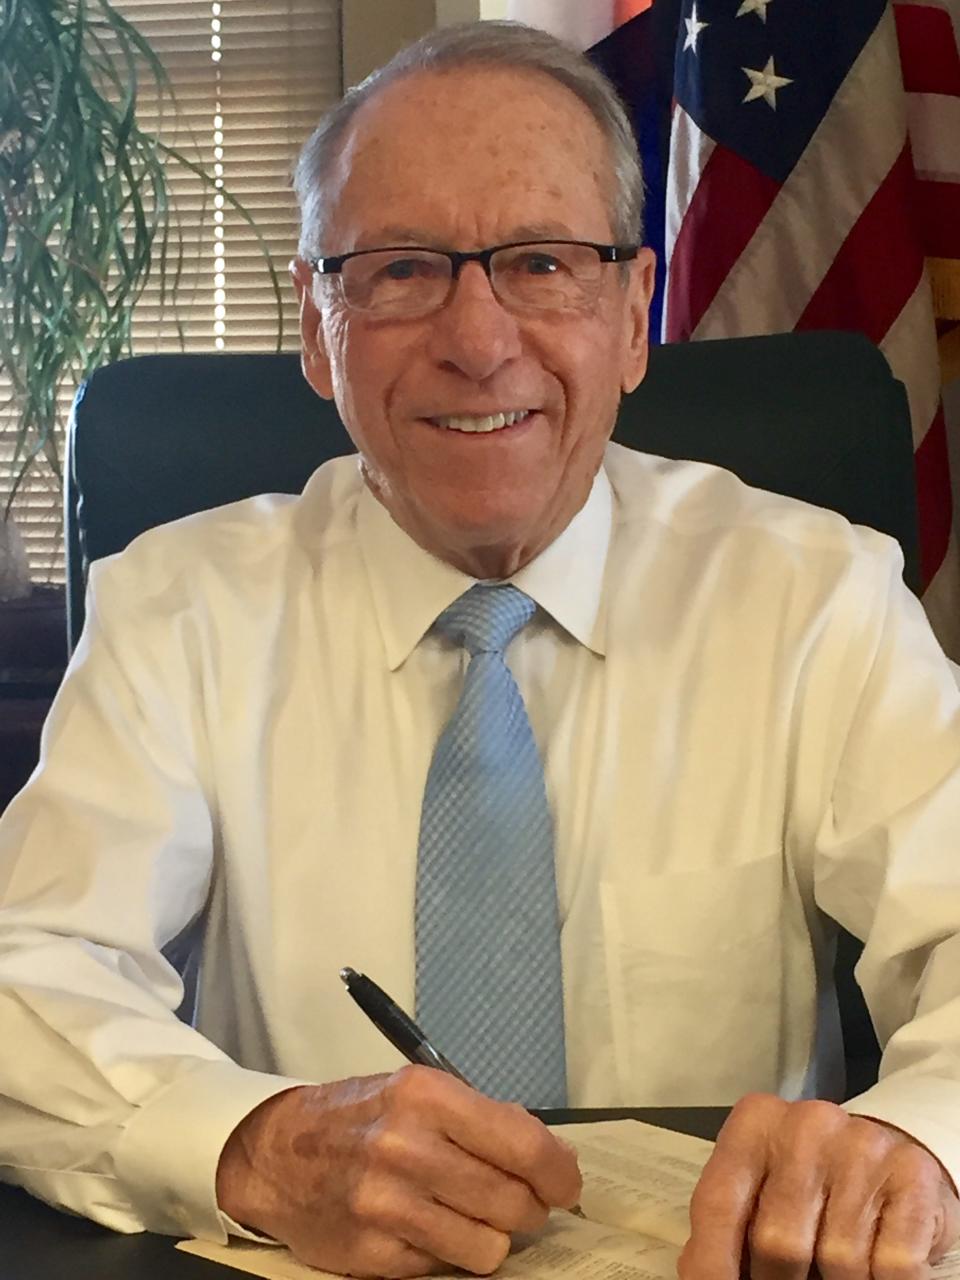 Dutchess County district attorney William Grady will retire at the end of his term in 2023.